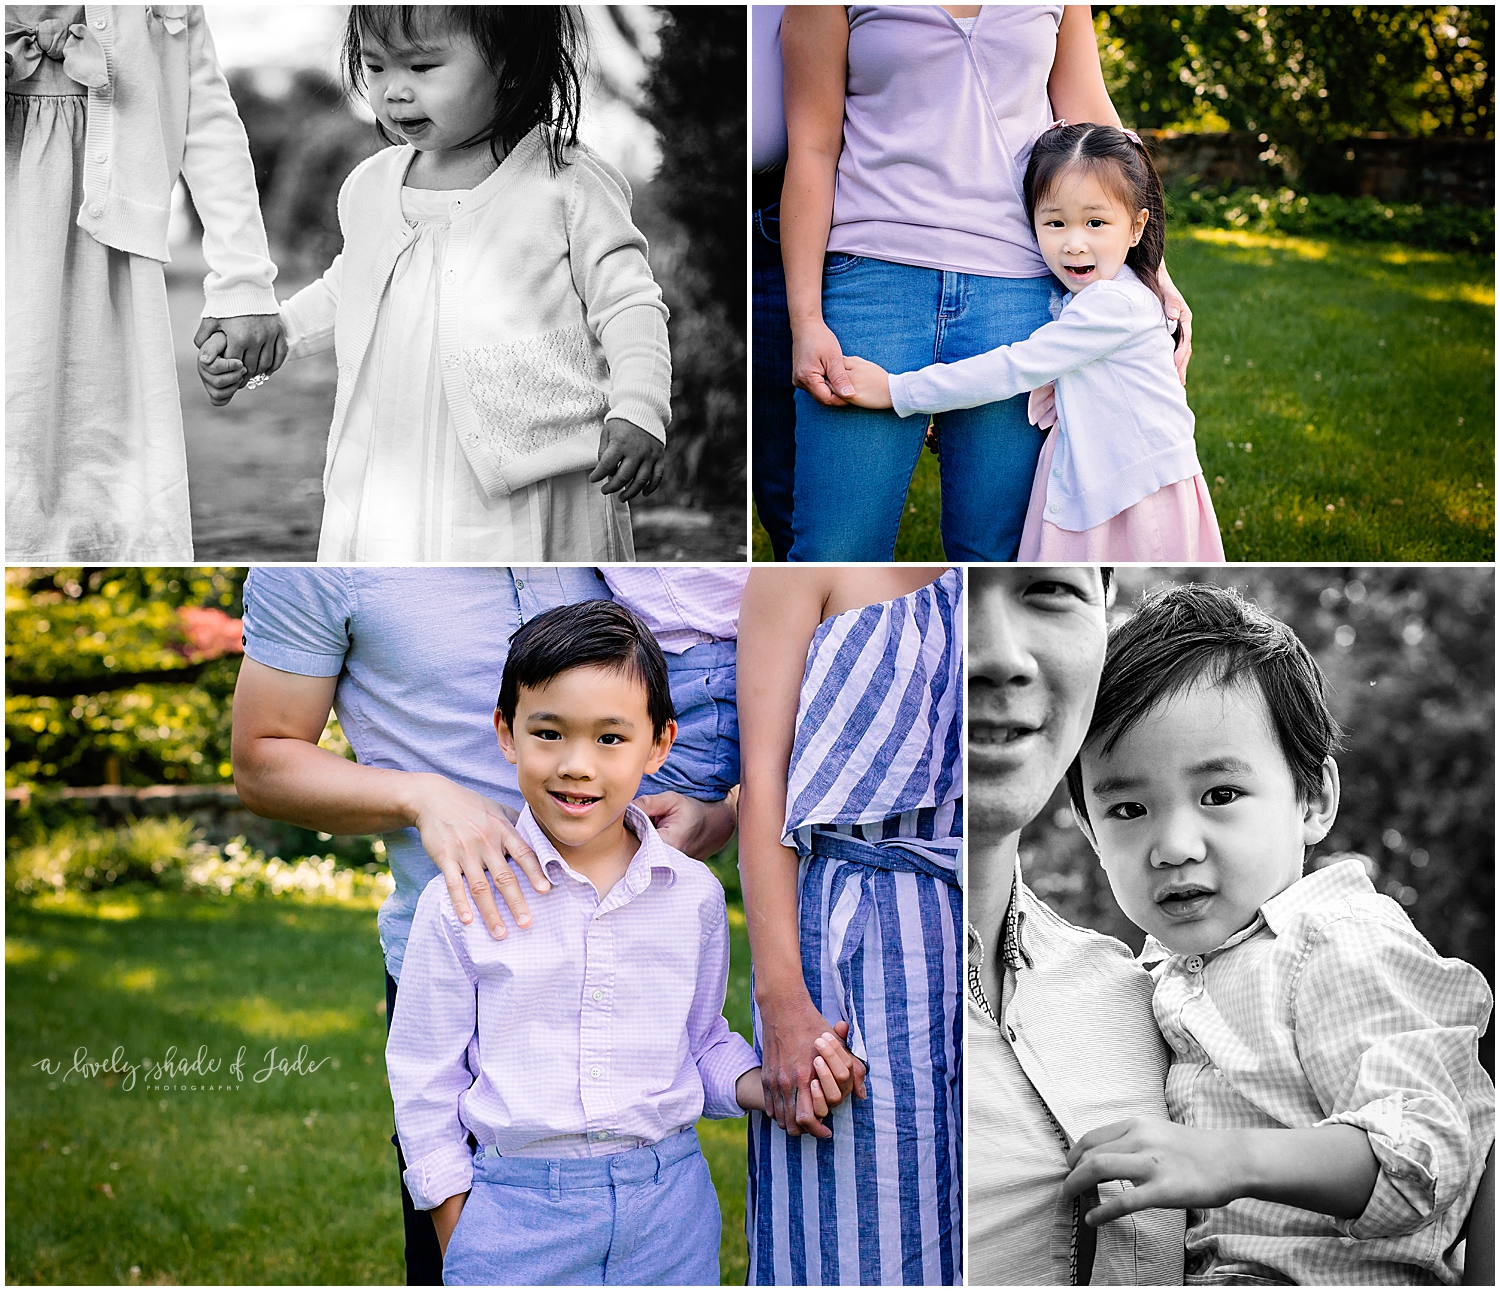 Fun_Extended_Family_Session_Morristown_NJ_Photography_0015.jpg